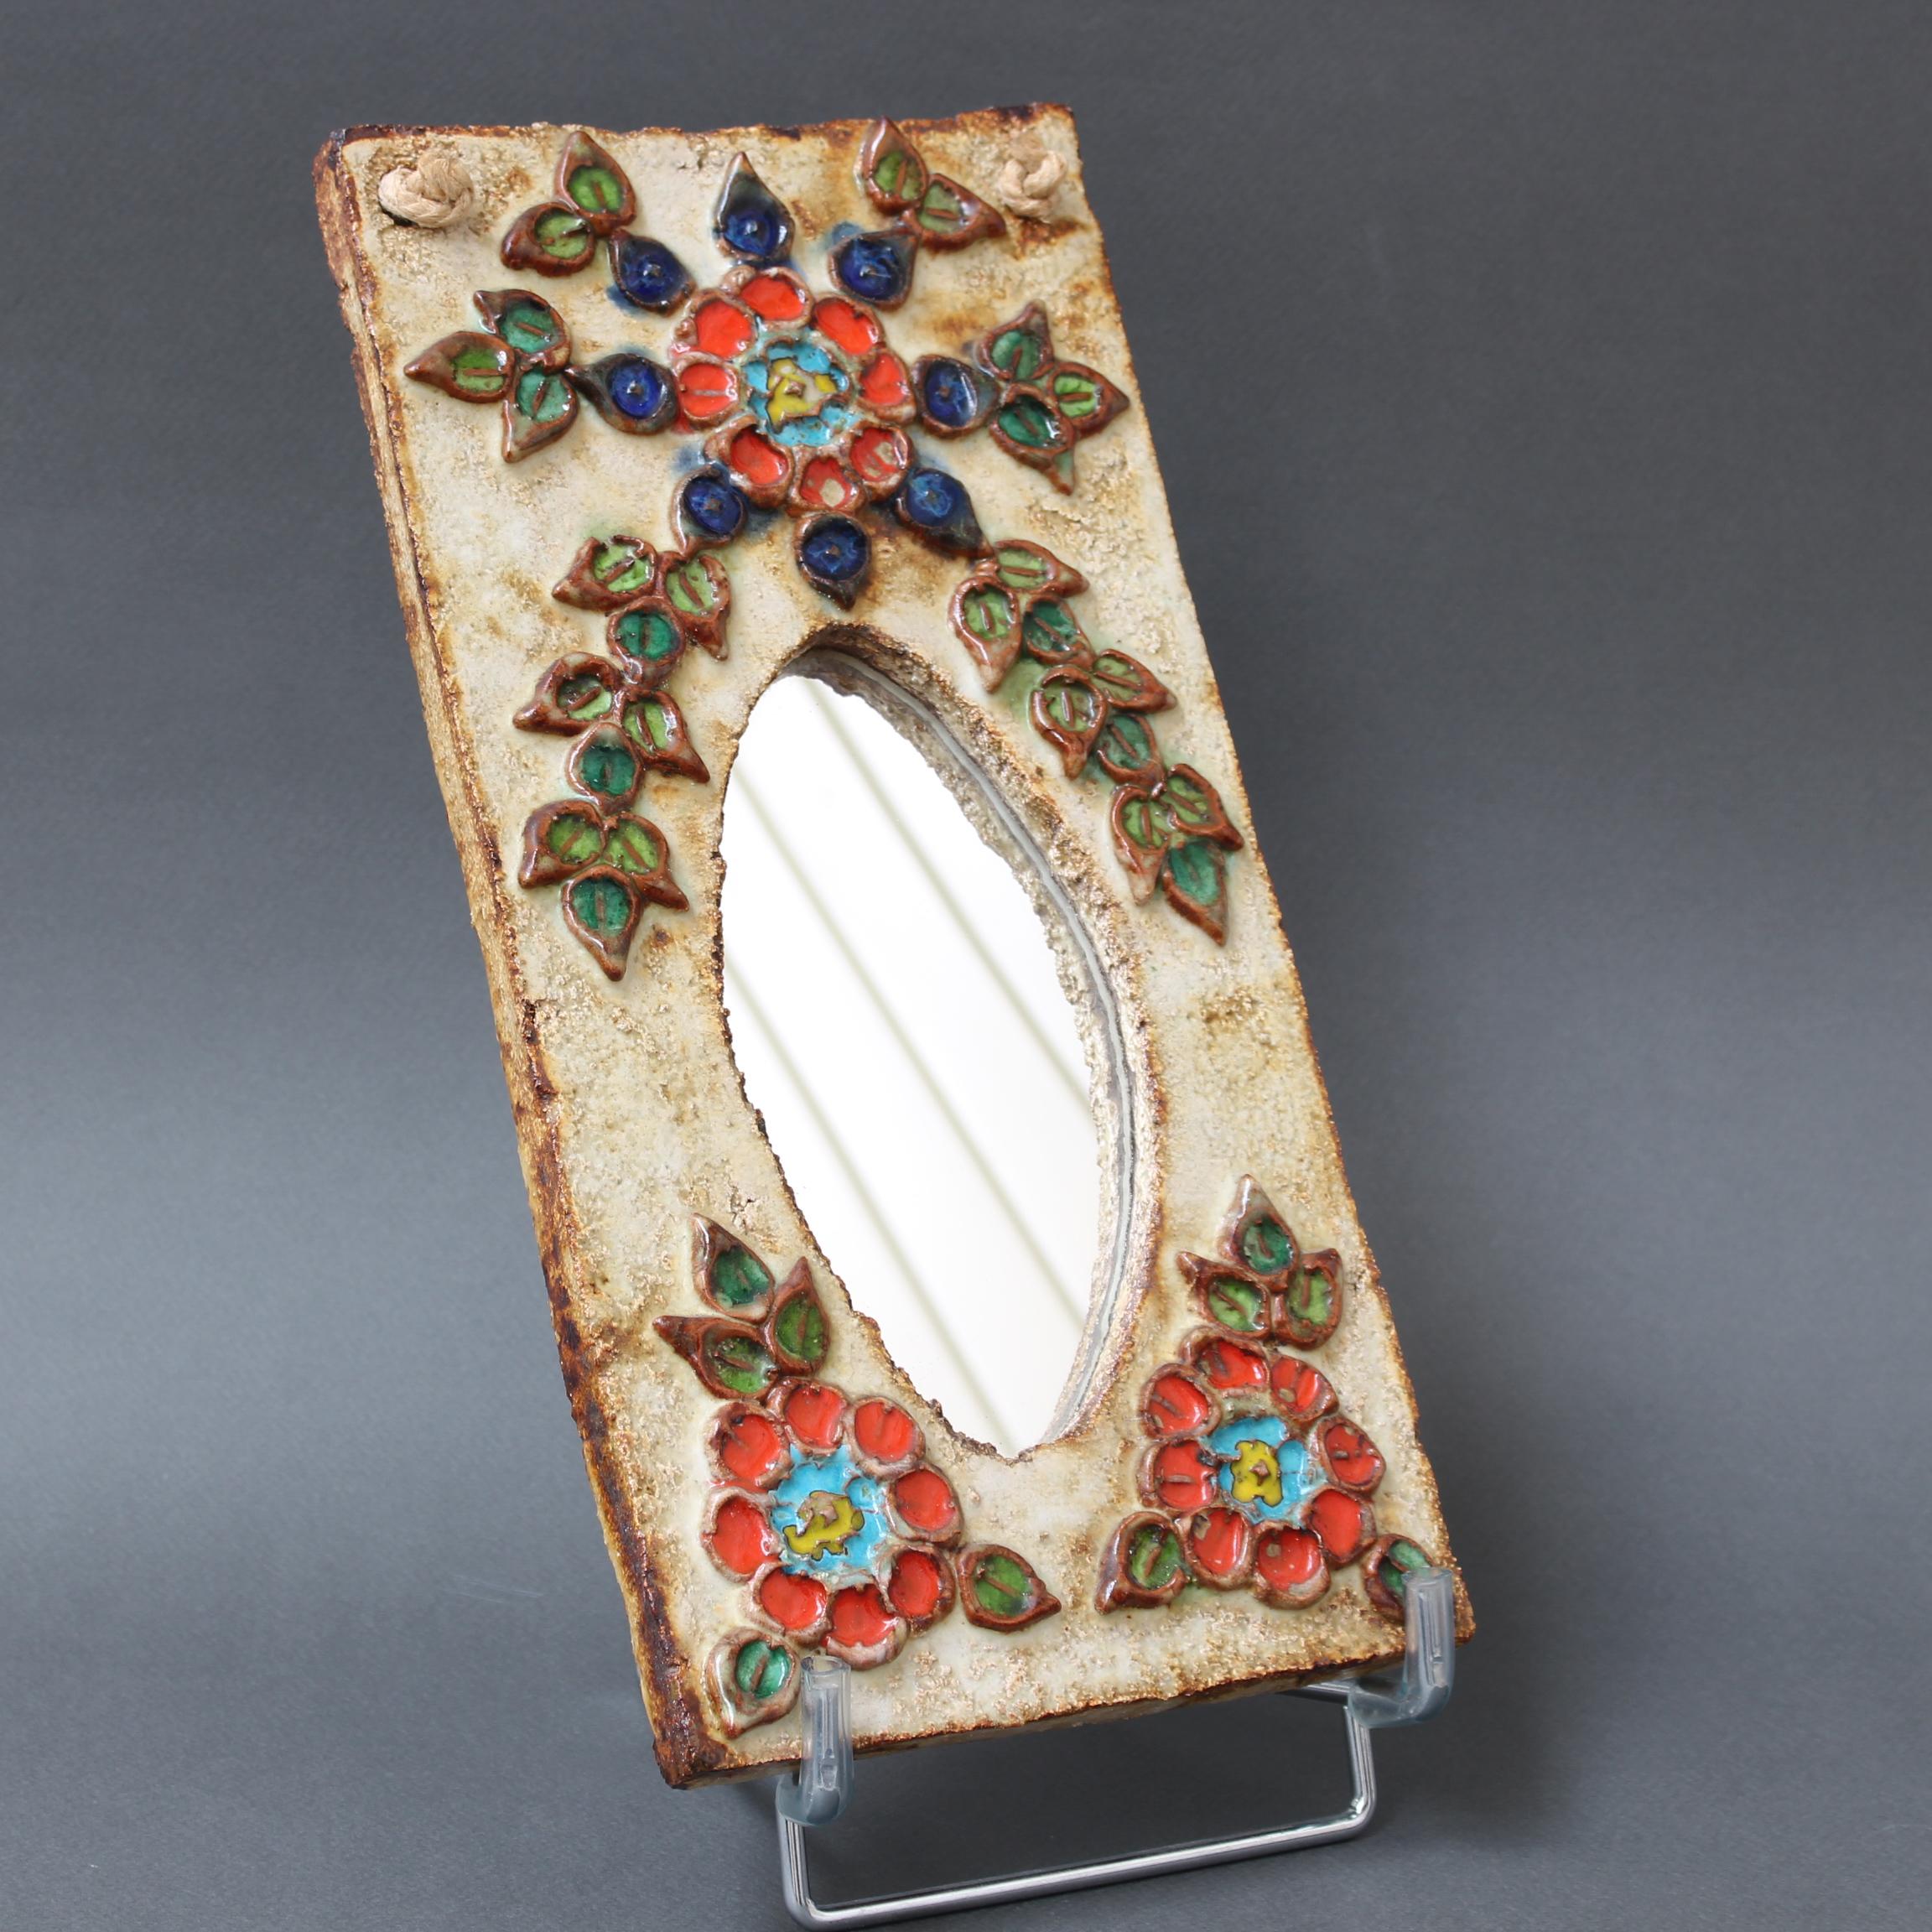 Ceramic flower-motif wall mirror with glazed leaves attributed to La Roue, Vallauris, France (circa 1960s). A charming, decorative small mirror with rustic but colourful details surrounding the elongated, rectangular mirror. A hanging cord runs